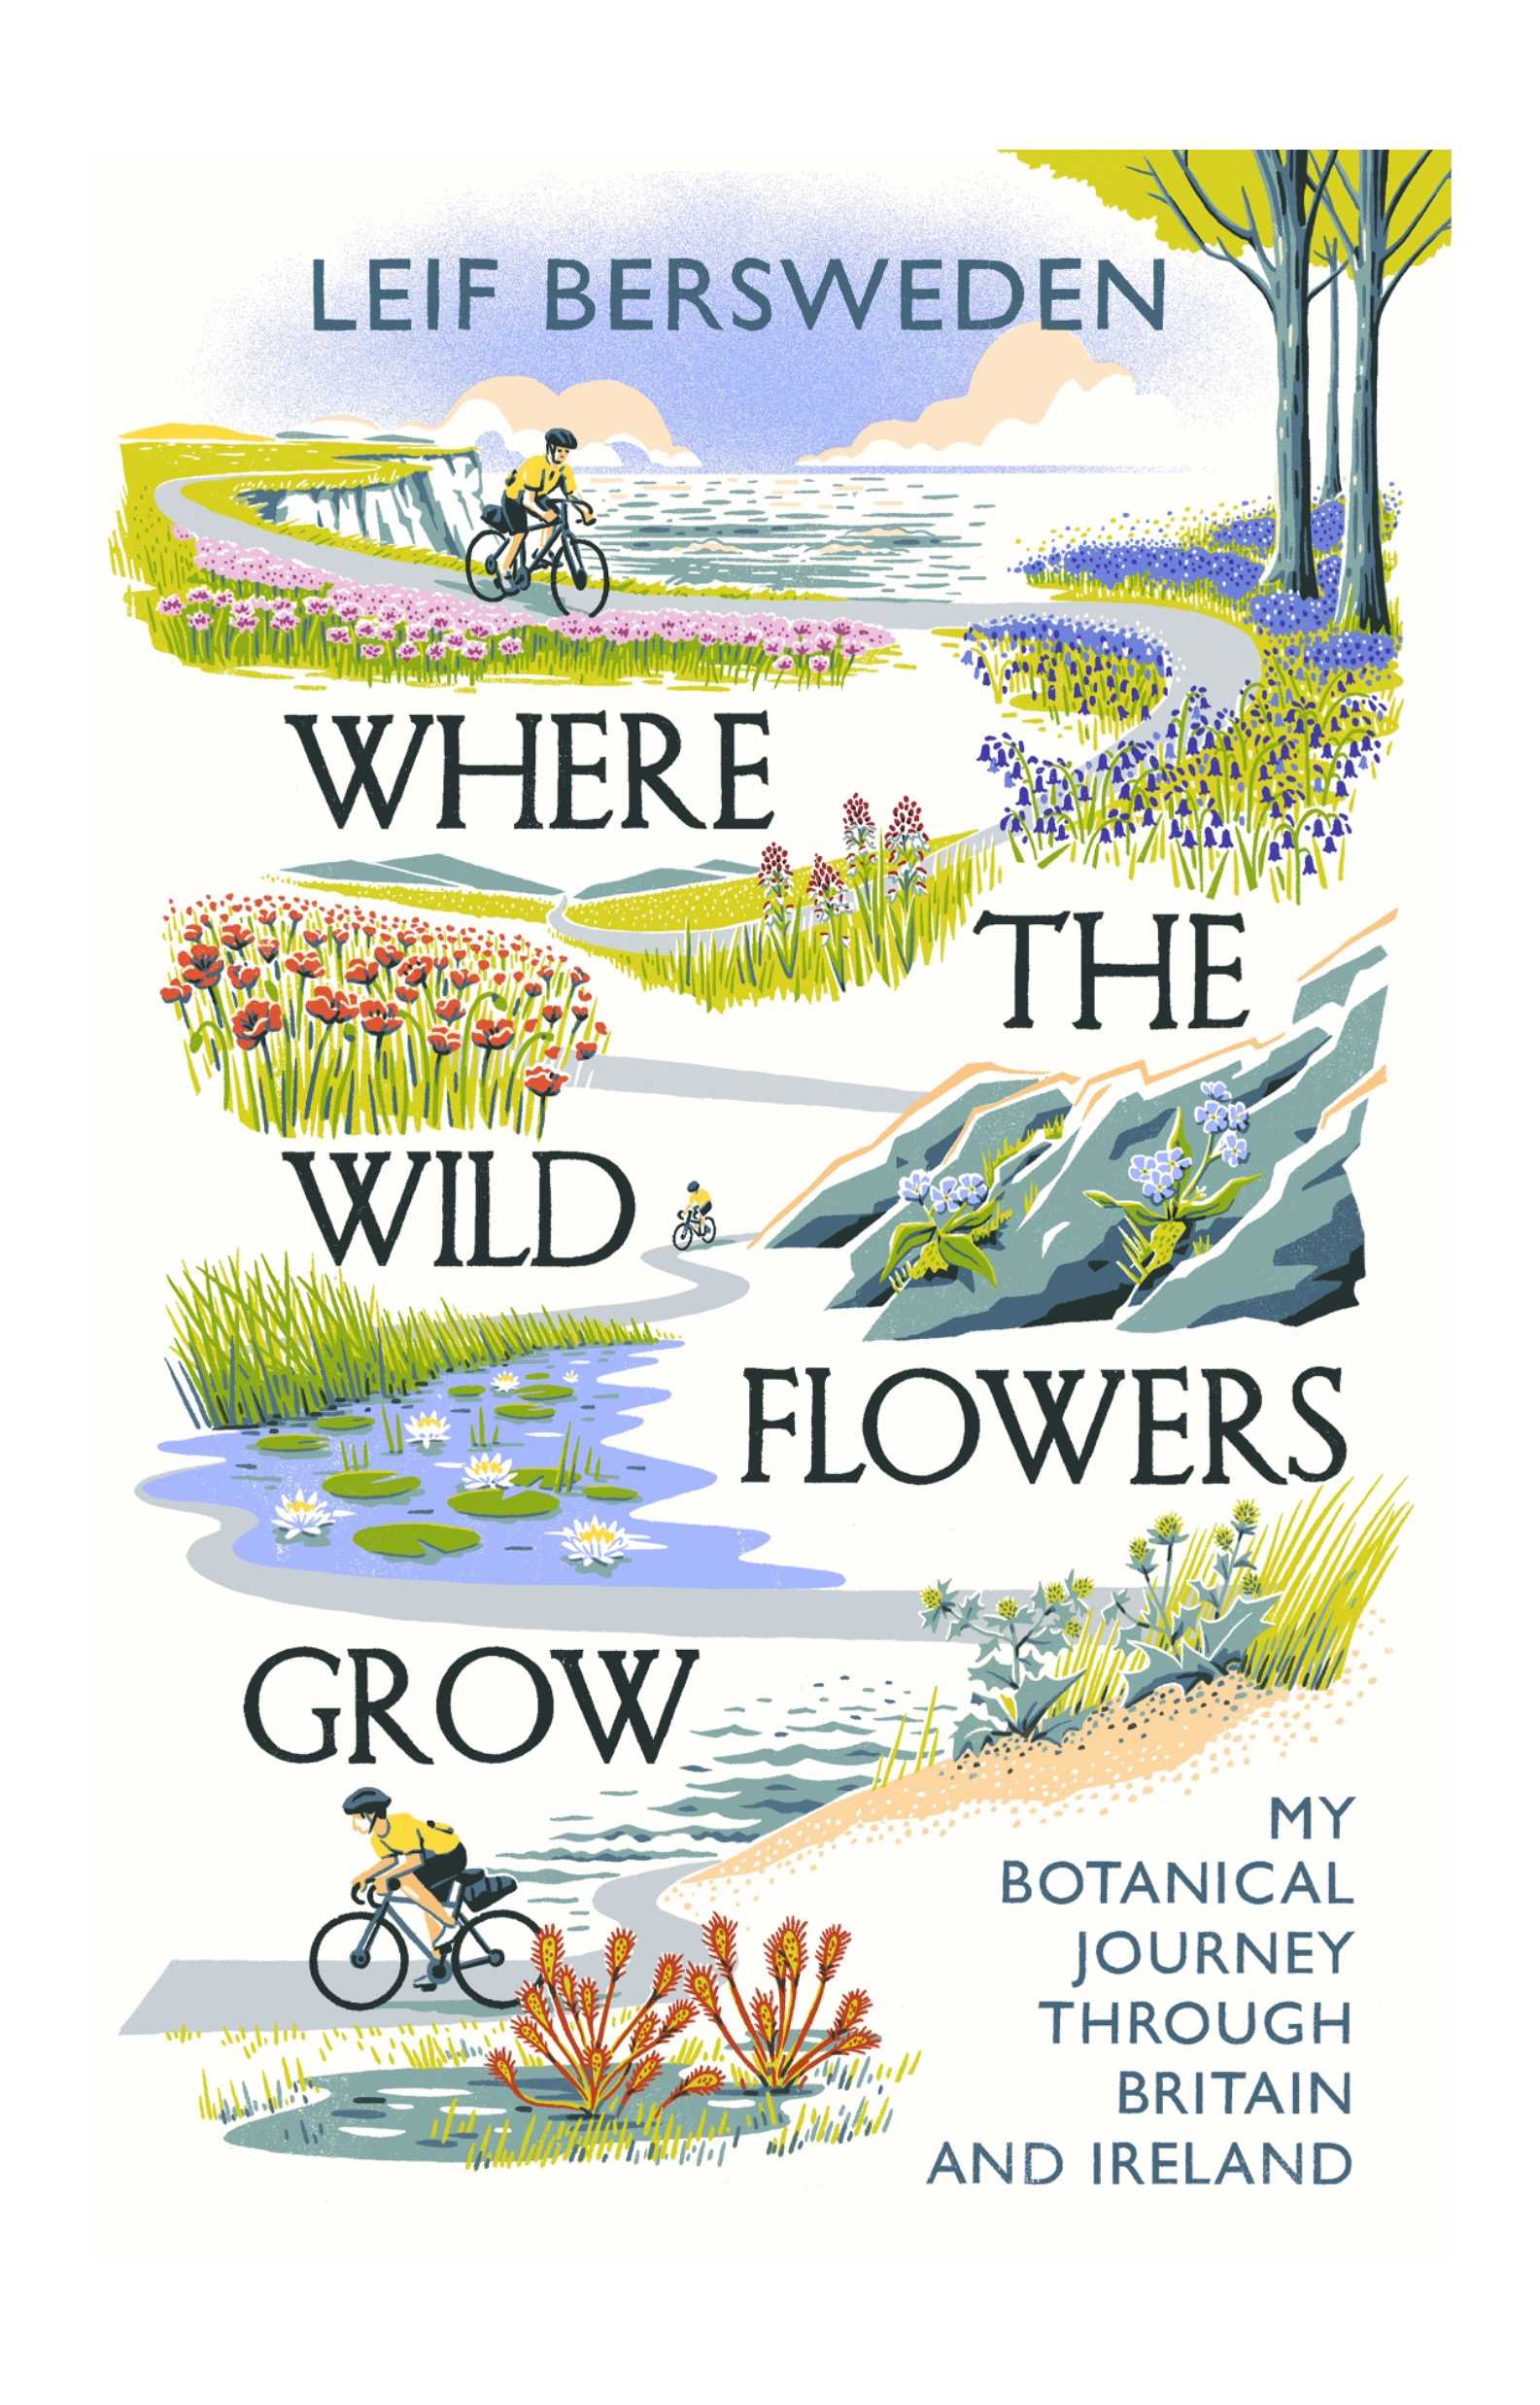 The front cover of Where the wildflowers